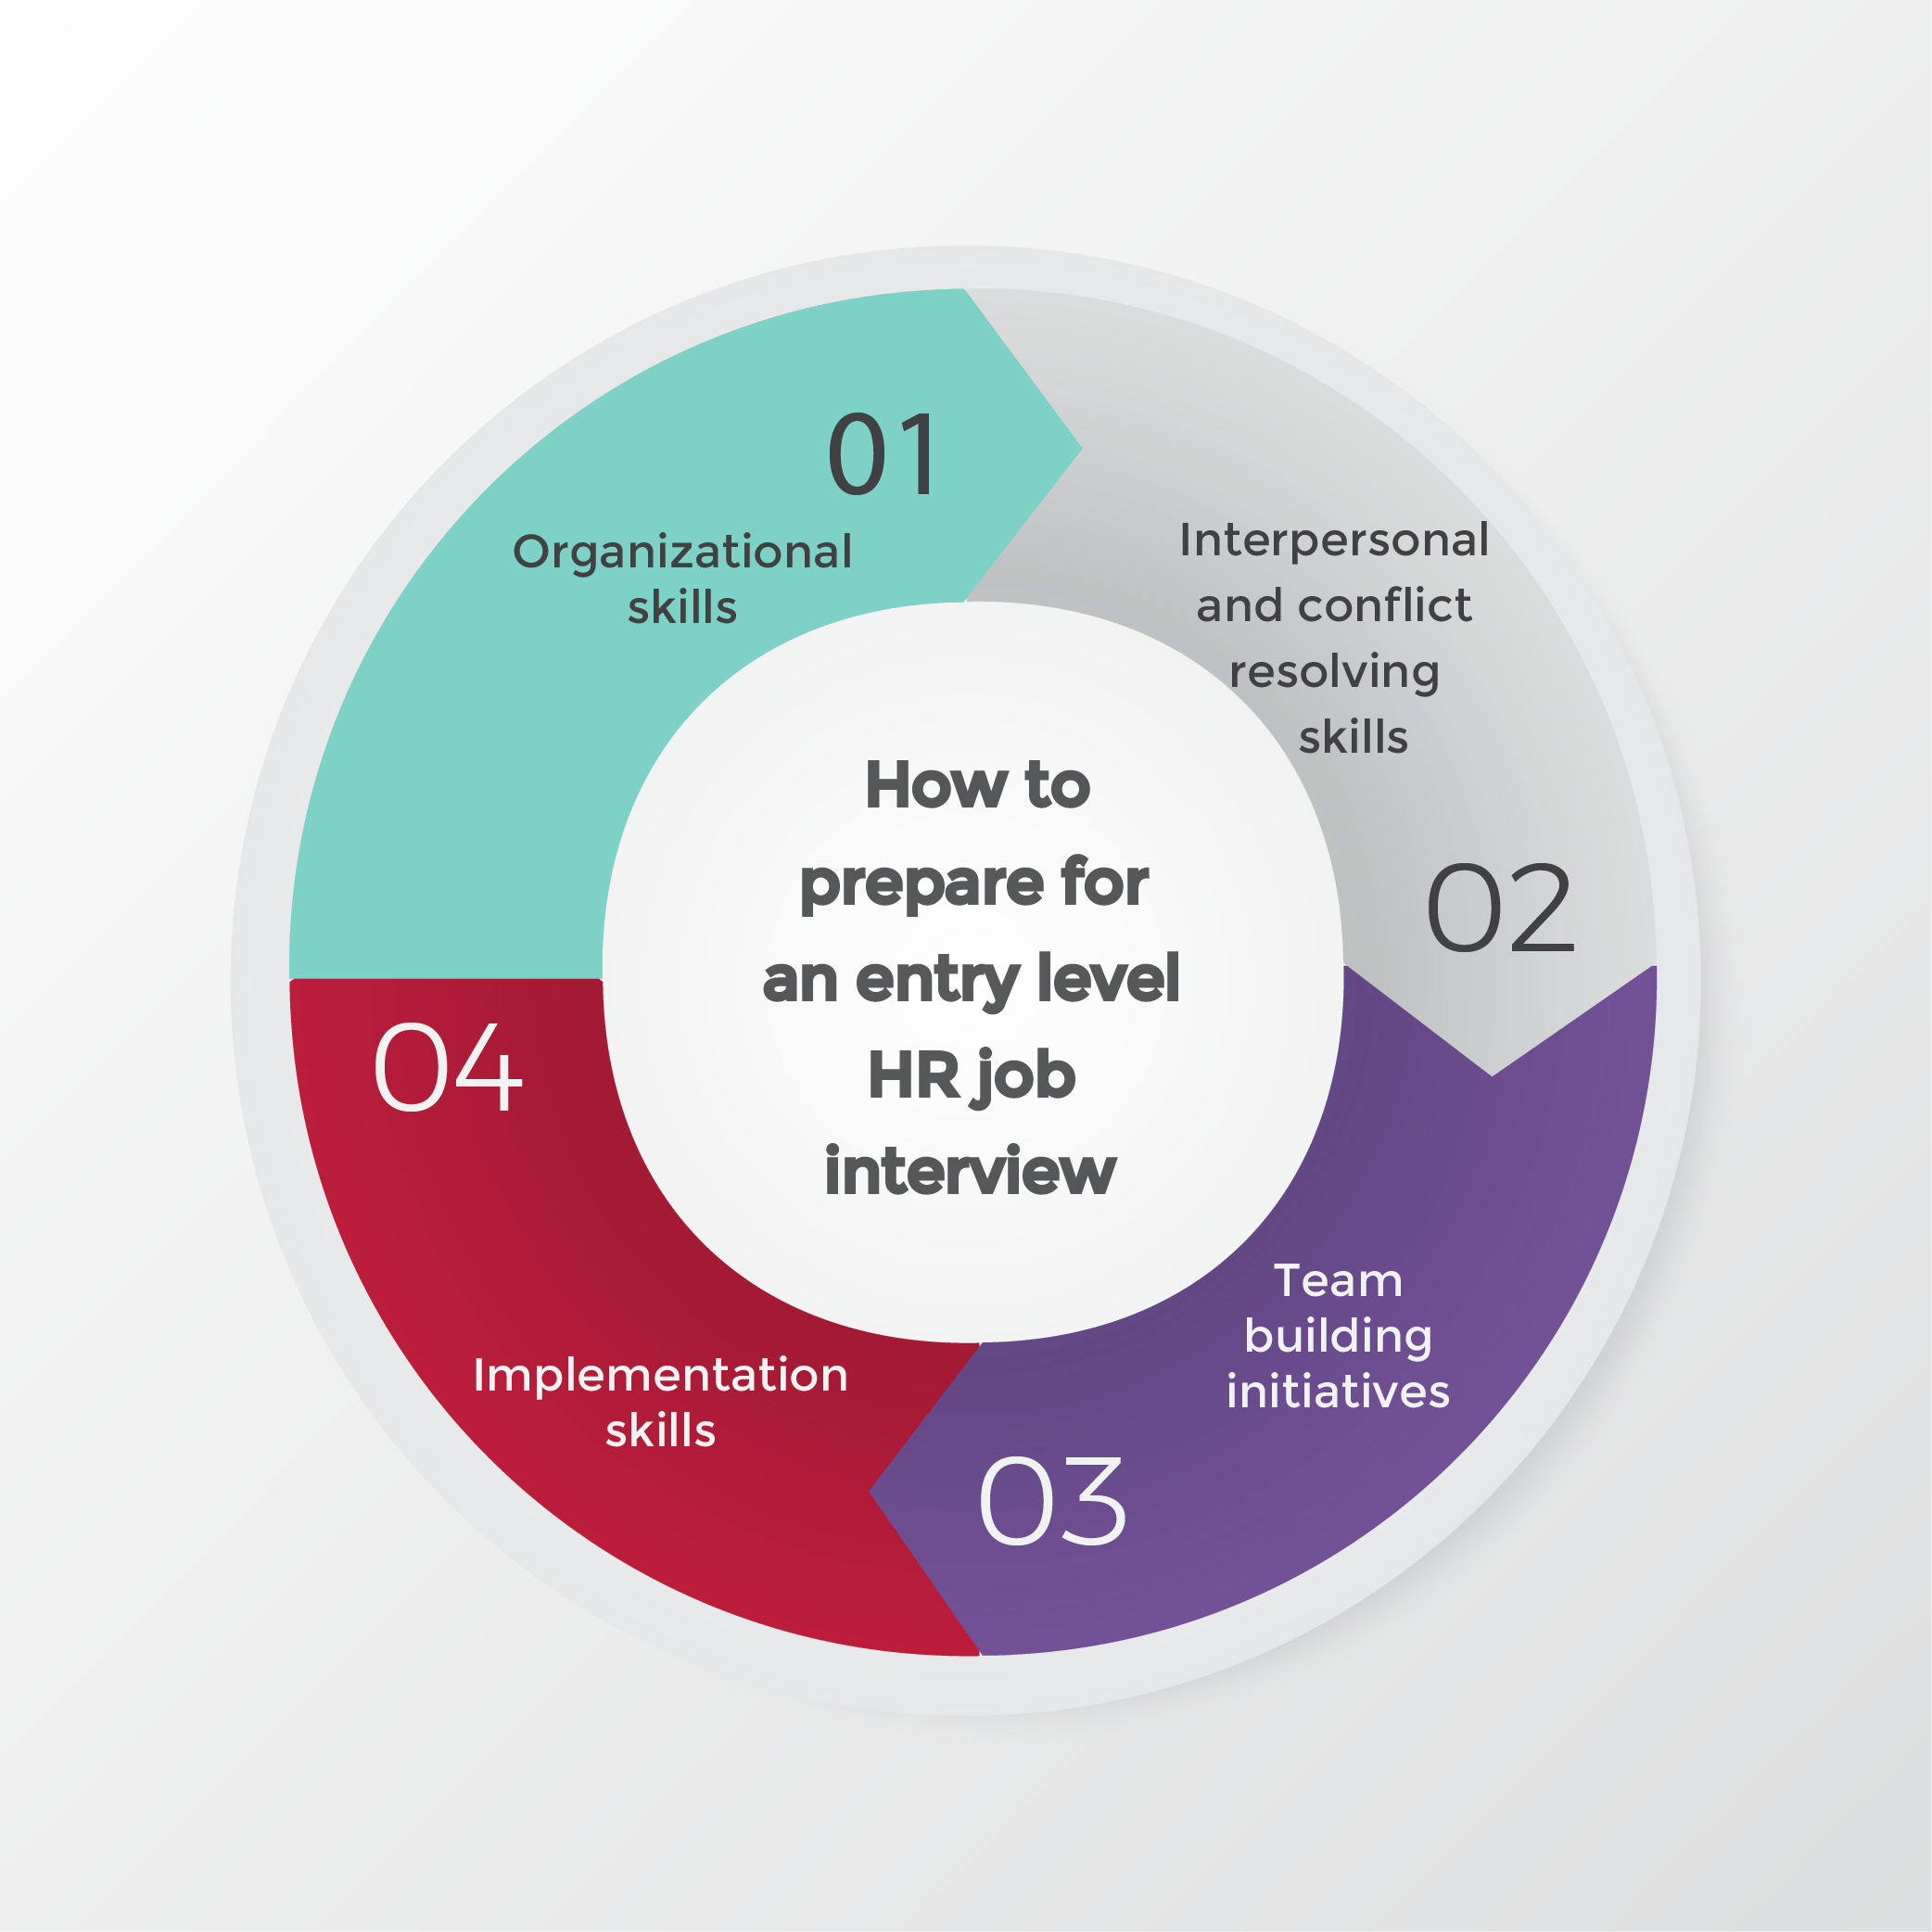 How to prepare for an entry level HR job interview